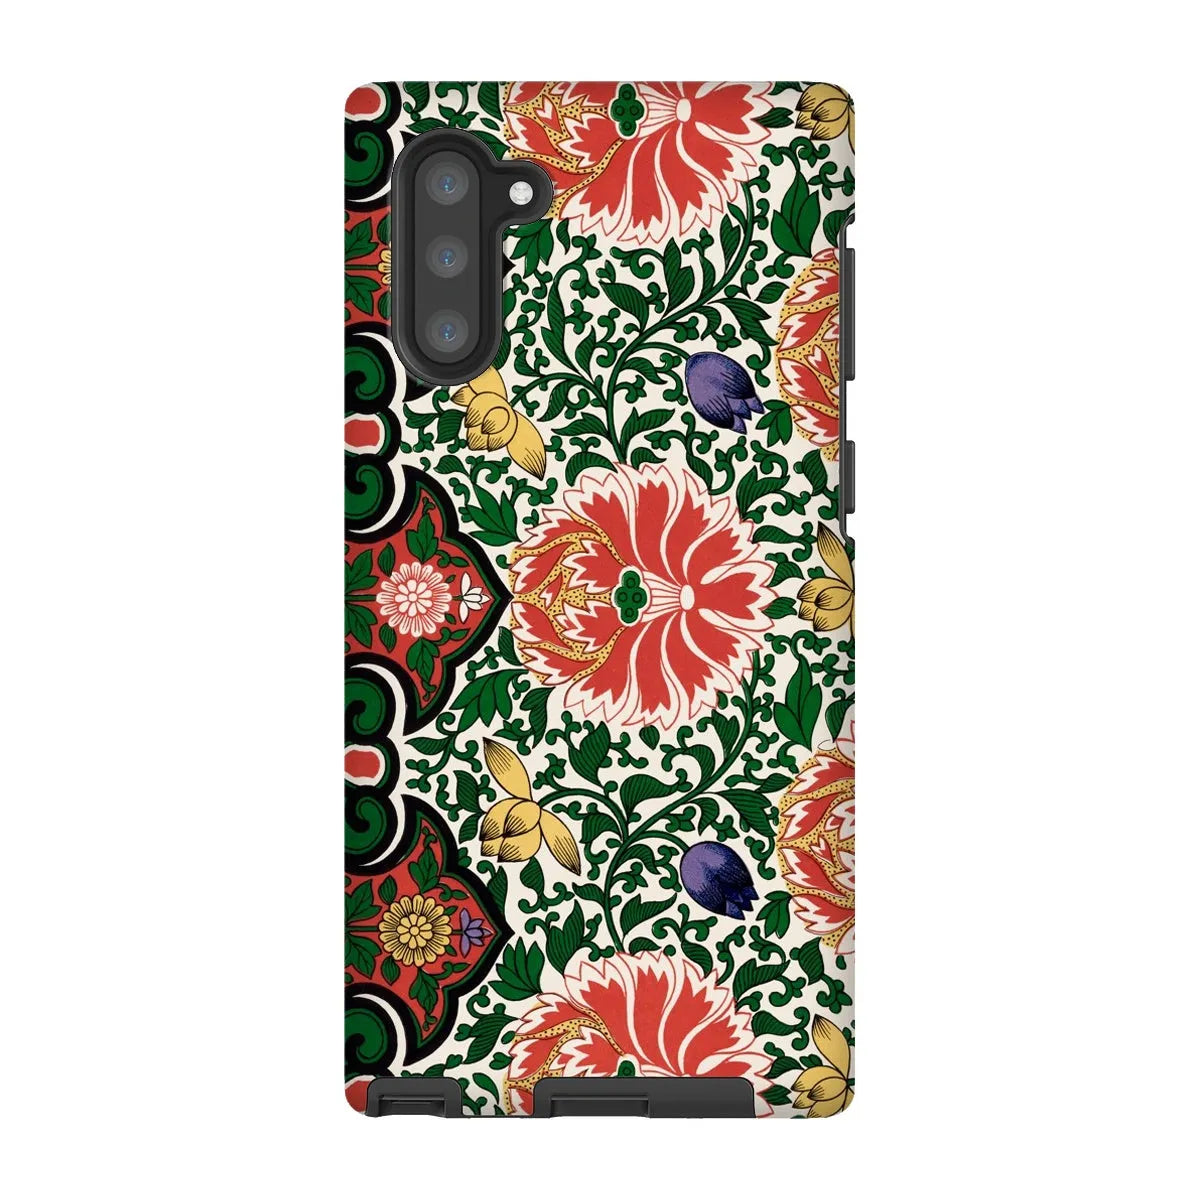 Chinese Floral Pattern Aesthetic Art Phone Case - Owen Jones - Samsung Galaxy Note 10 / Matte - Mobile Phone Cases